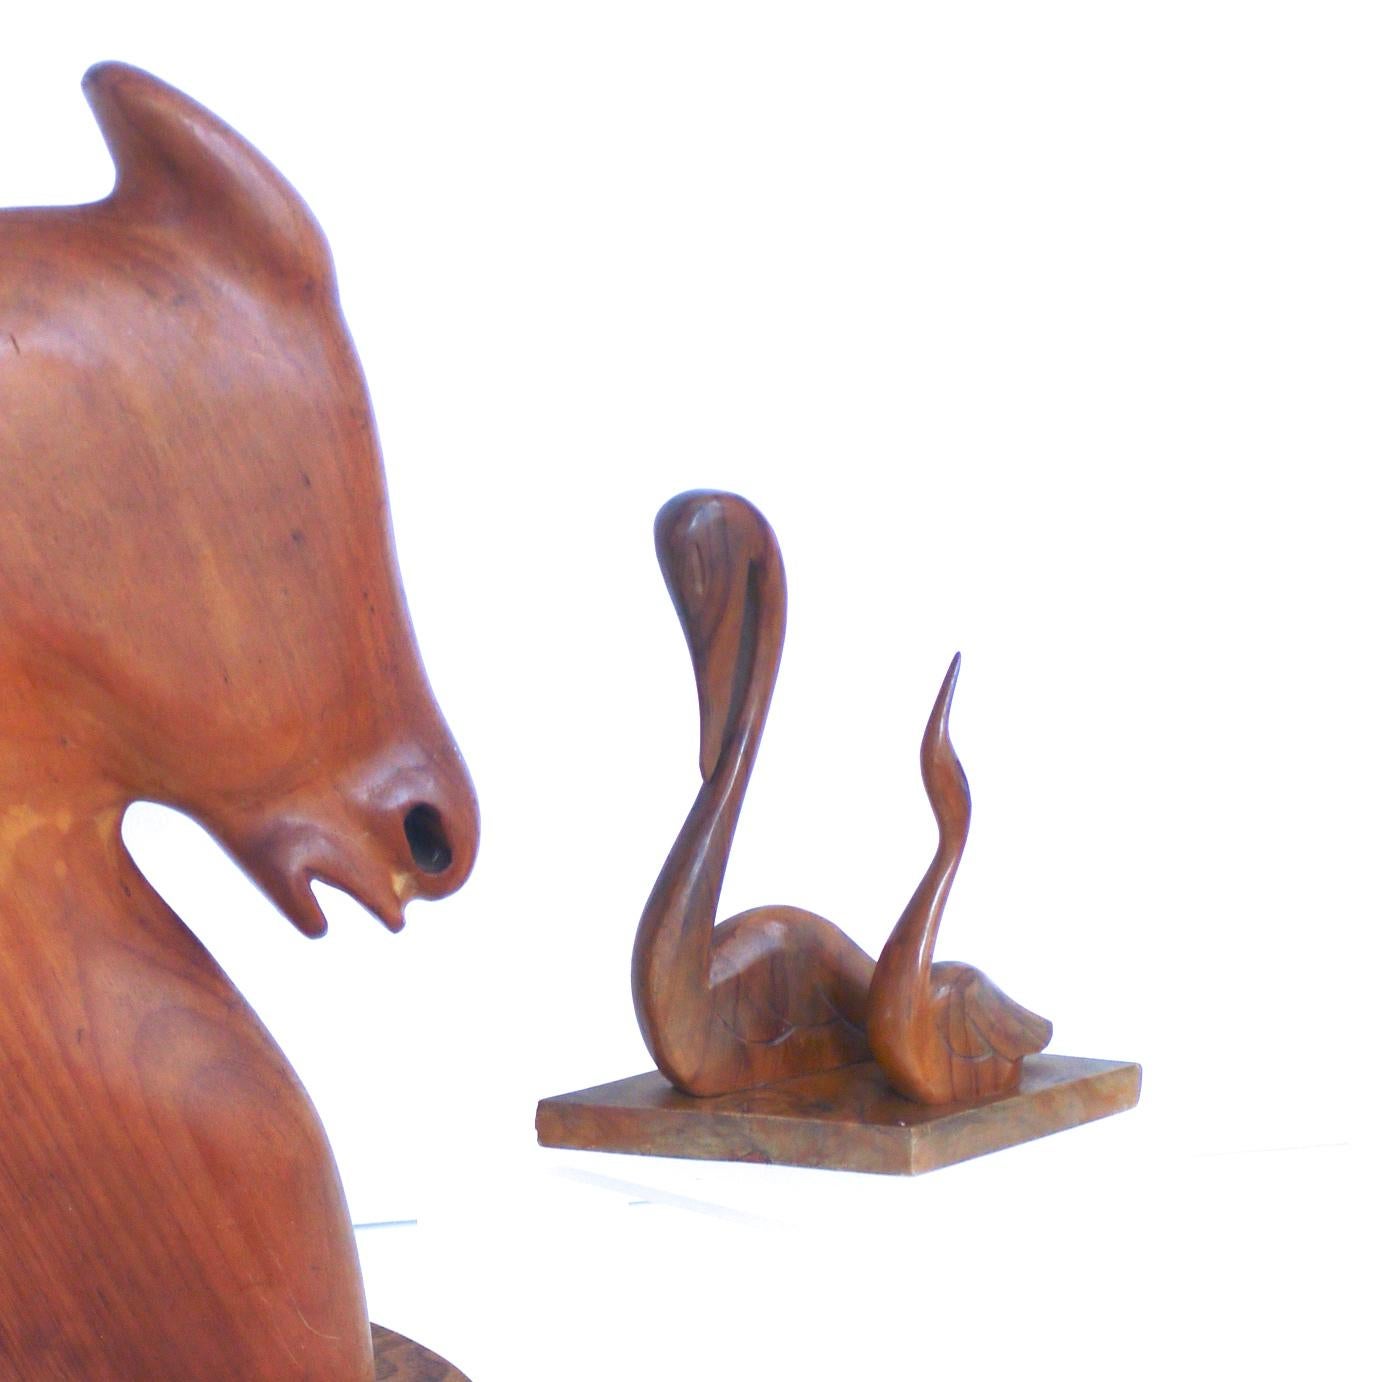 Mid-20th Century Scandinavian Modern Hand Carved Sculpture, Pair of Swans 1955 in Polished Teak For Sale